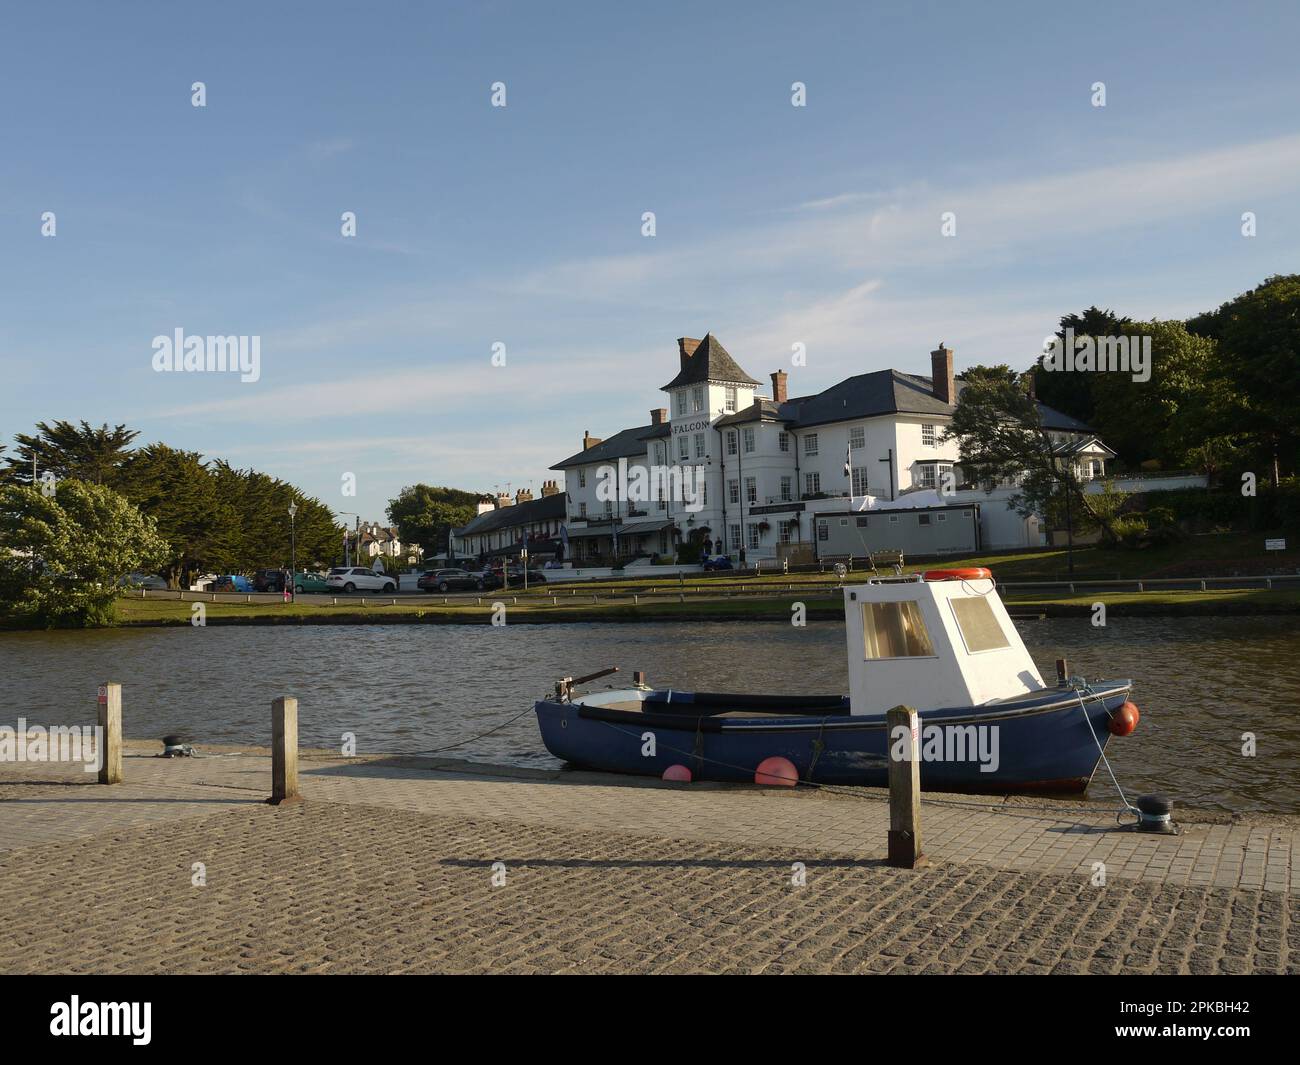 Falcon Hotel Bude, as seen from the opposite bank of Bude Canal - Cornwall, UK, June 2018 Stock Photo